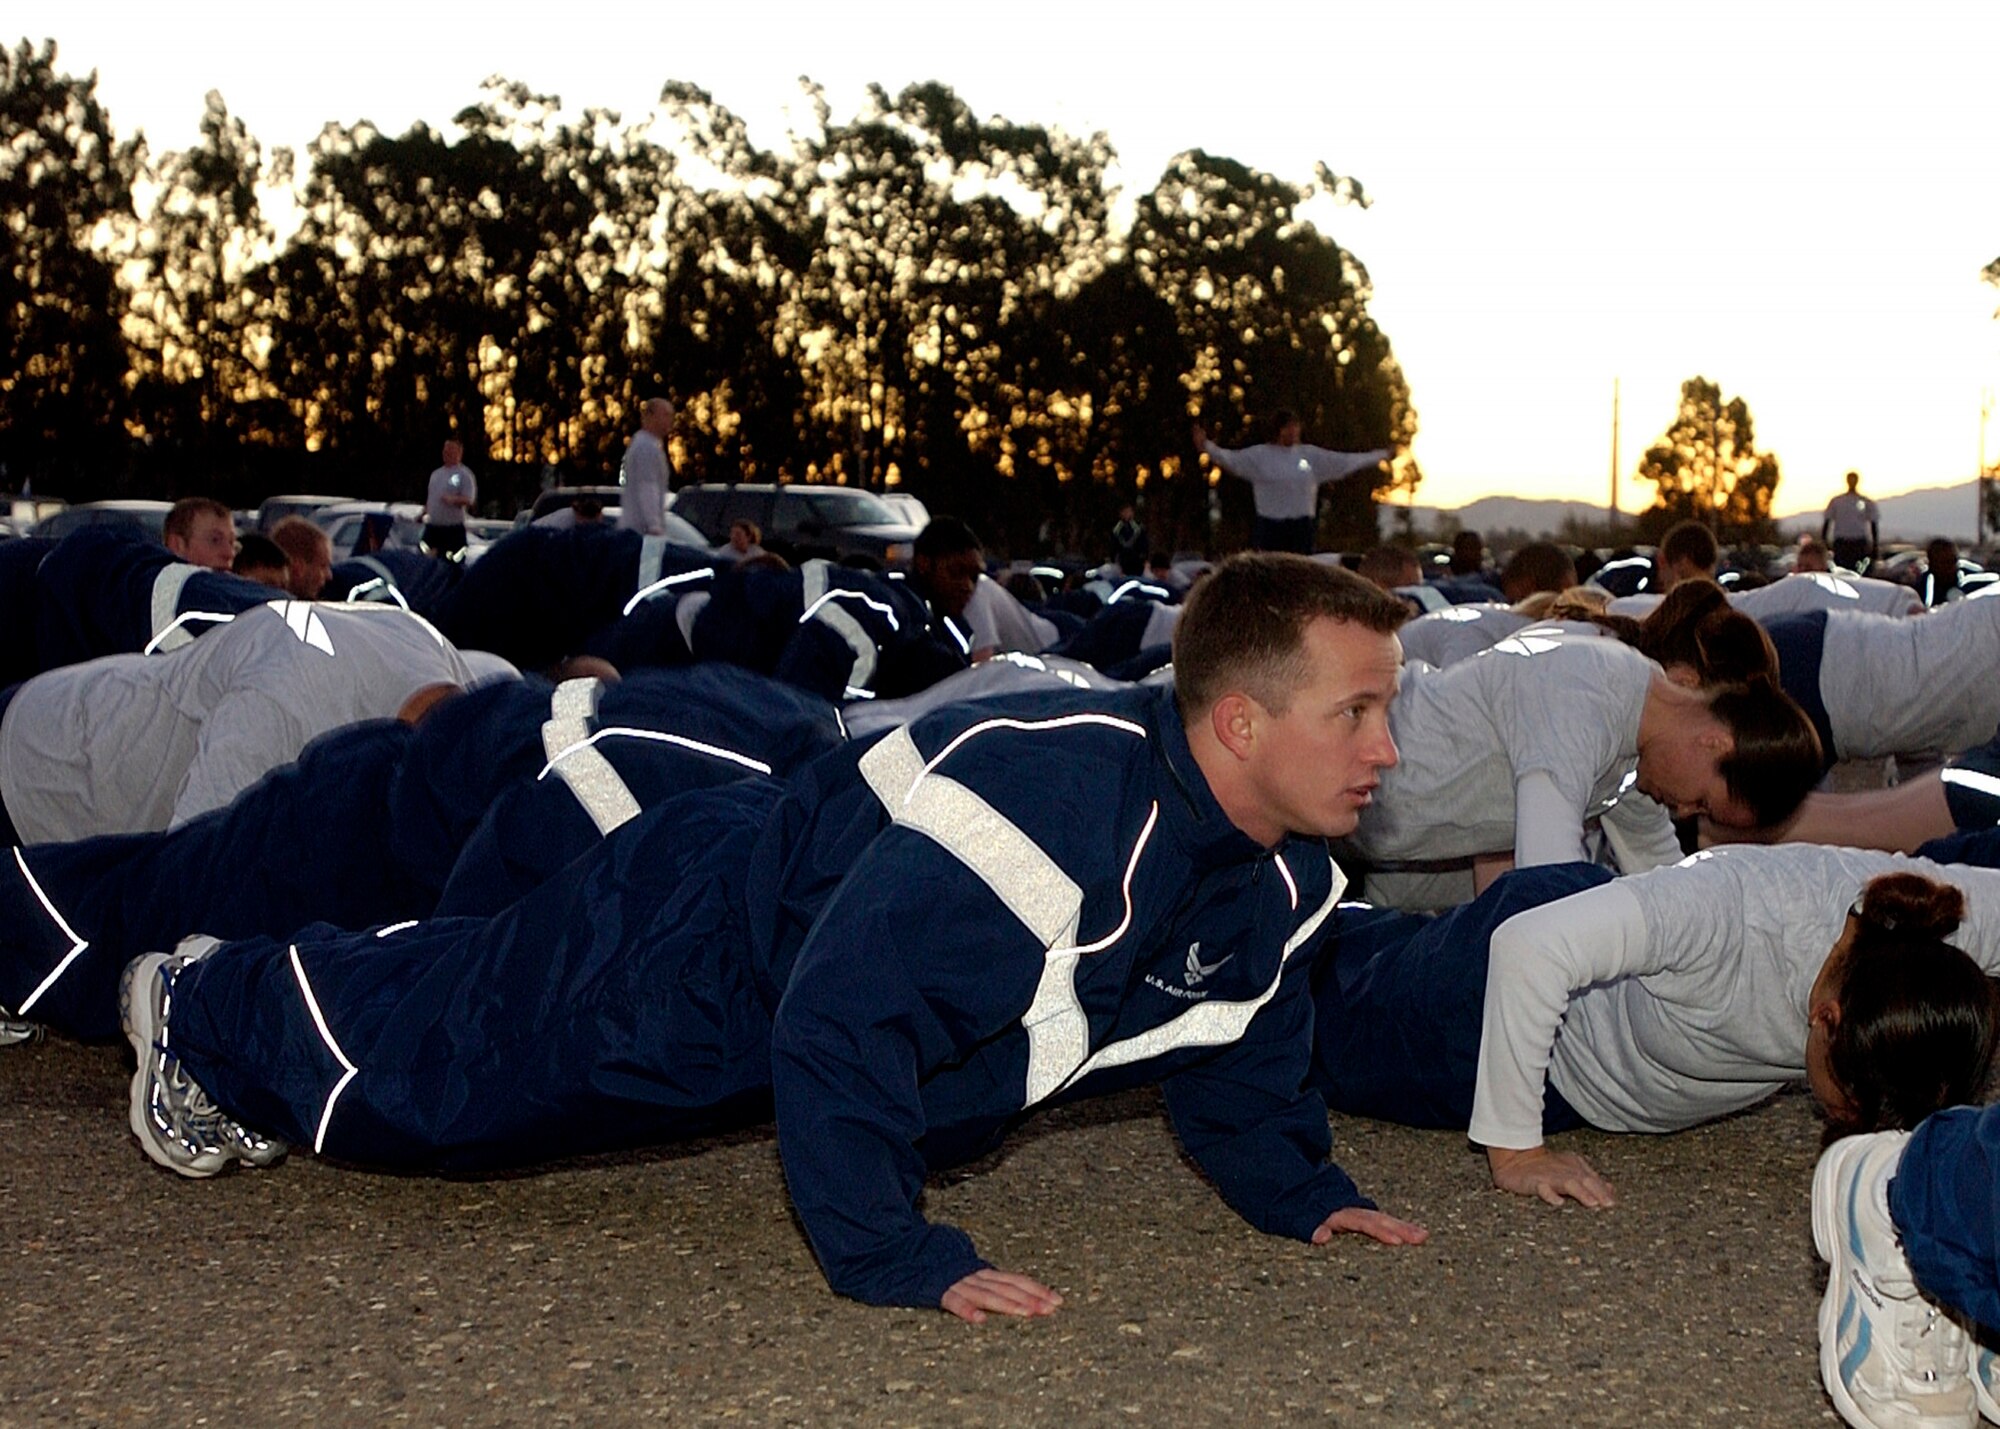 Staff Sgt. Jacob Beck, 30th Space Communications Squadron,  warms up before the 30th Space Wing's monthly Fit to Fight run December 7, 2006 here. The five-kilometer run takes place on the first Thursday of every month.  (U.S. Air Force photo by Airman 1st Class Stephanie Longoria)